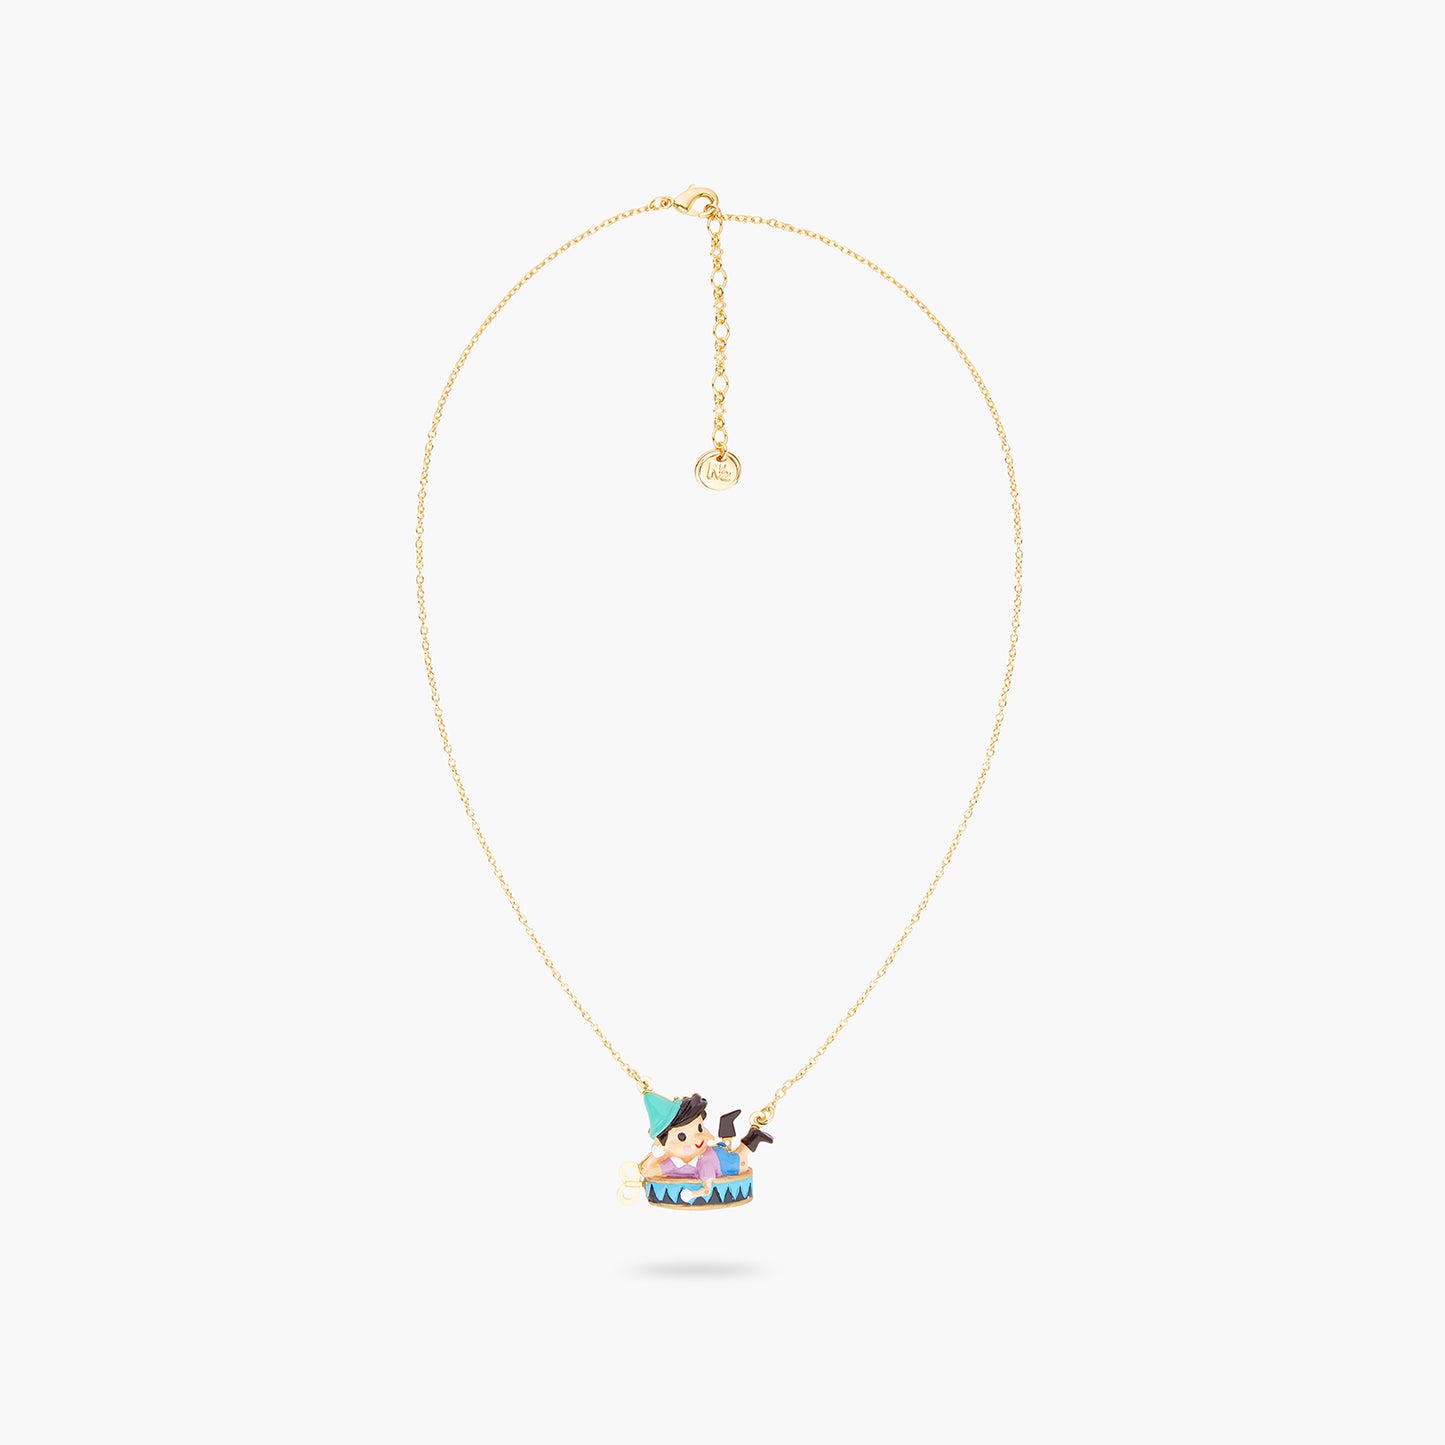 Pinocchio And Circus Tent Necklace | ARPI3011